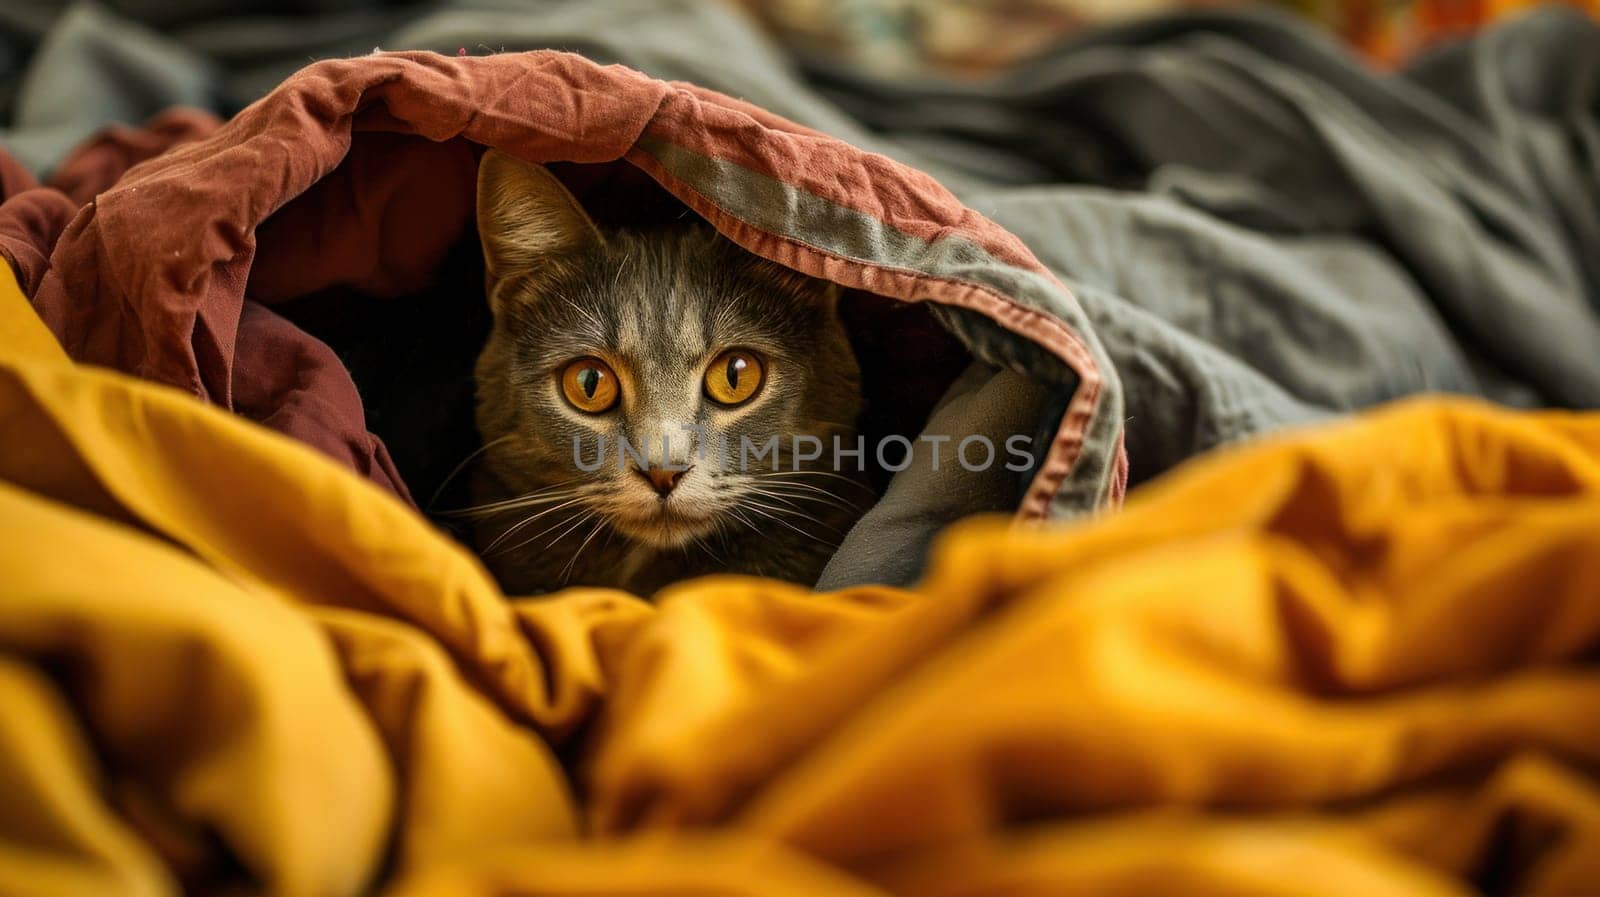 A cat peeking out from under a blanket on top of bedding